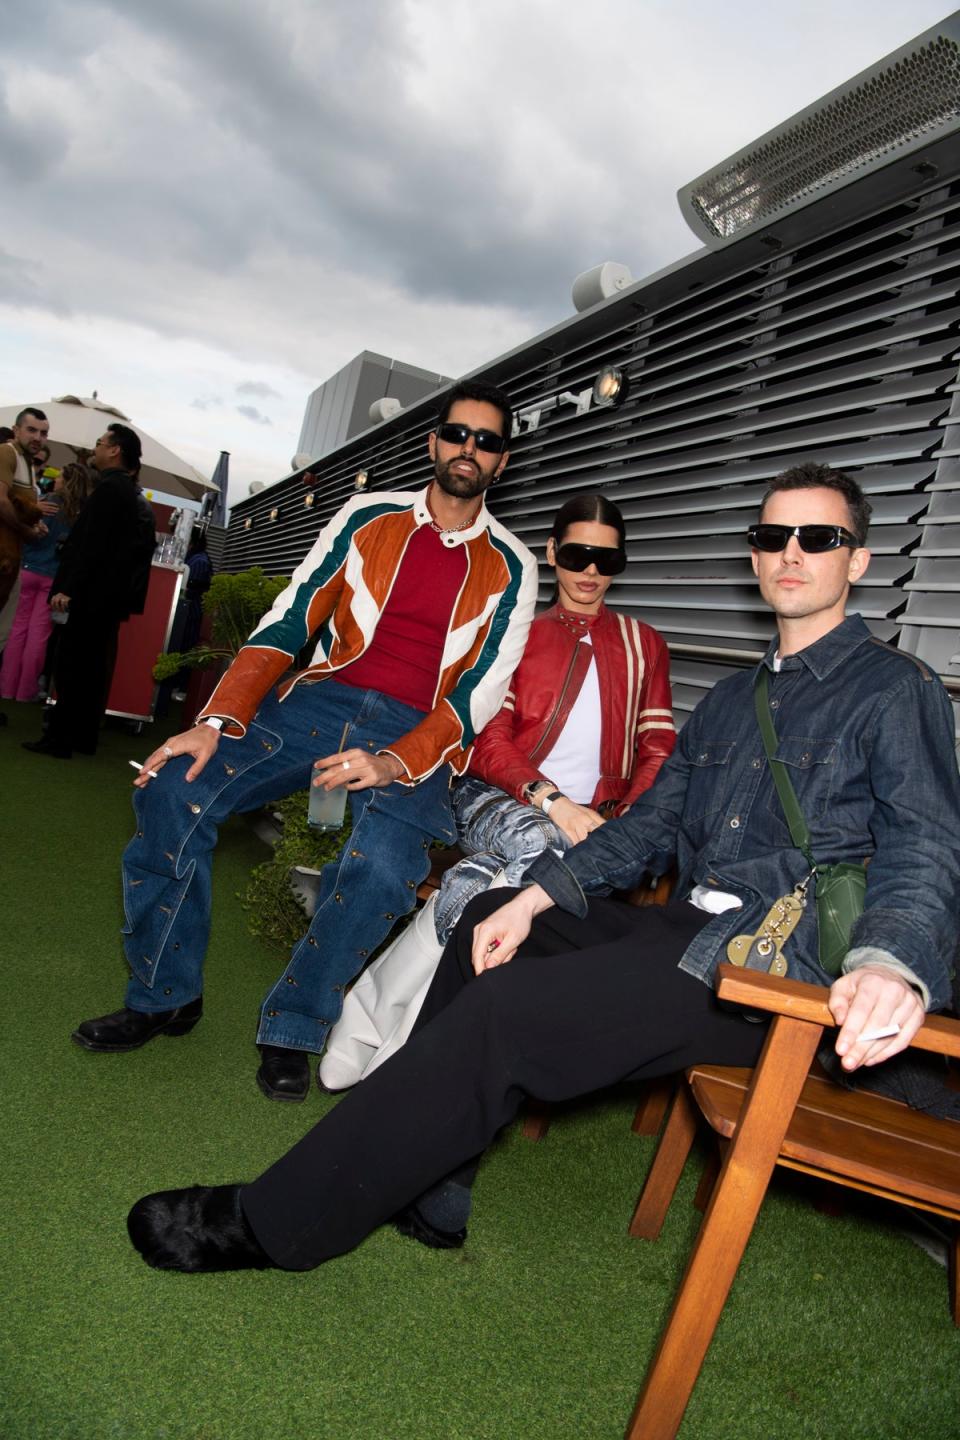 Guests wear shades at The Standard (The Standard / Jason Lloyd-Evans)